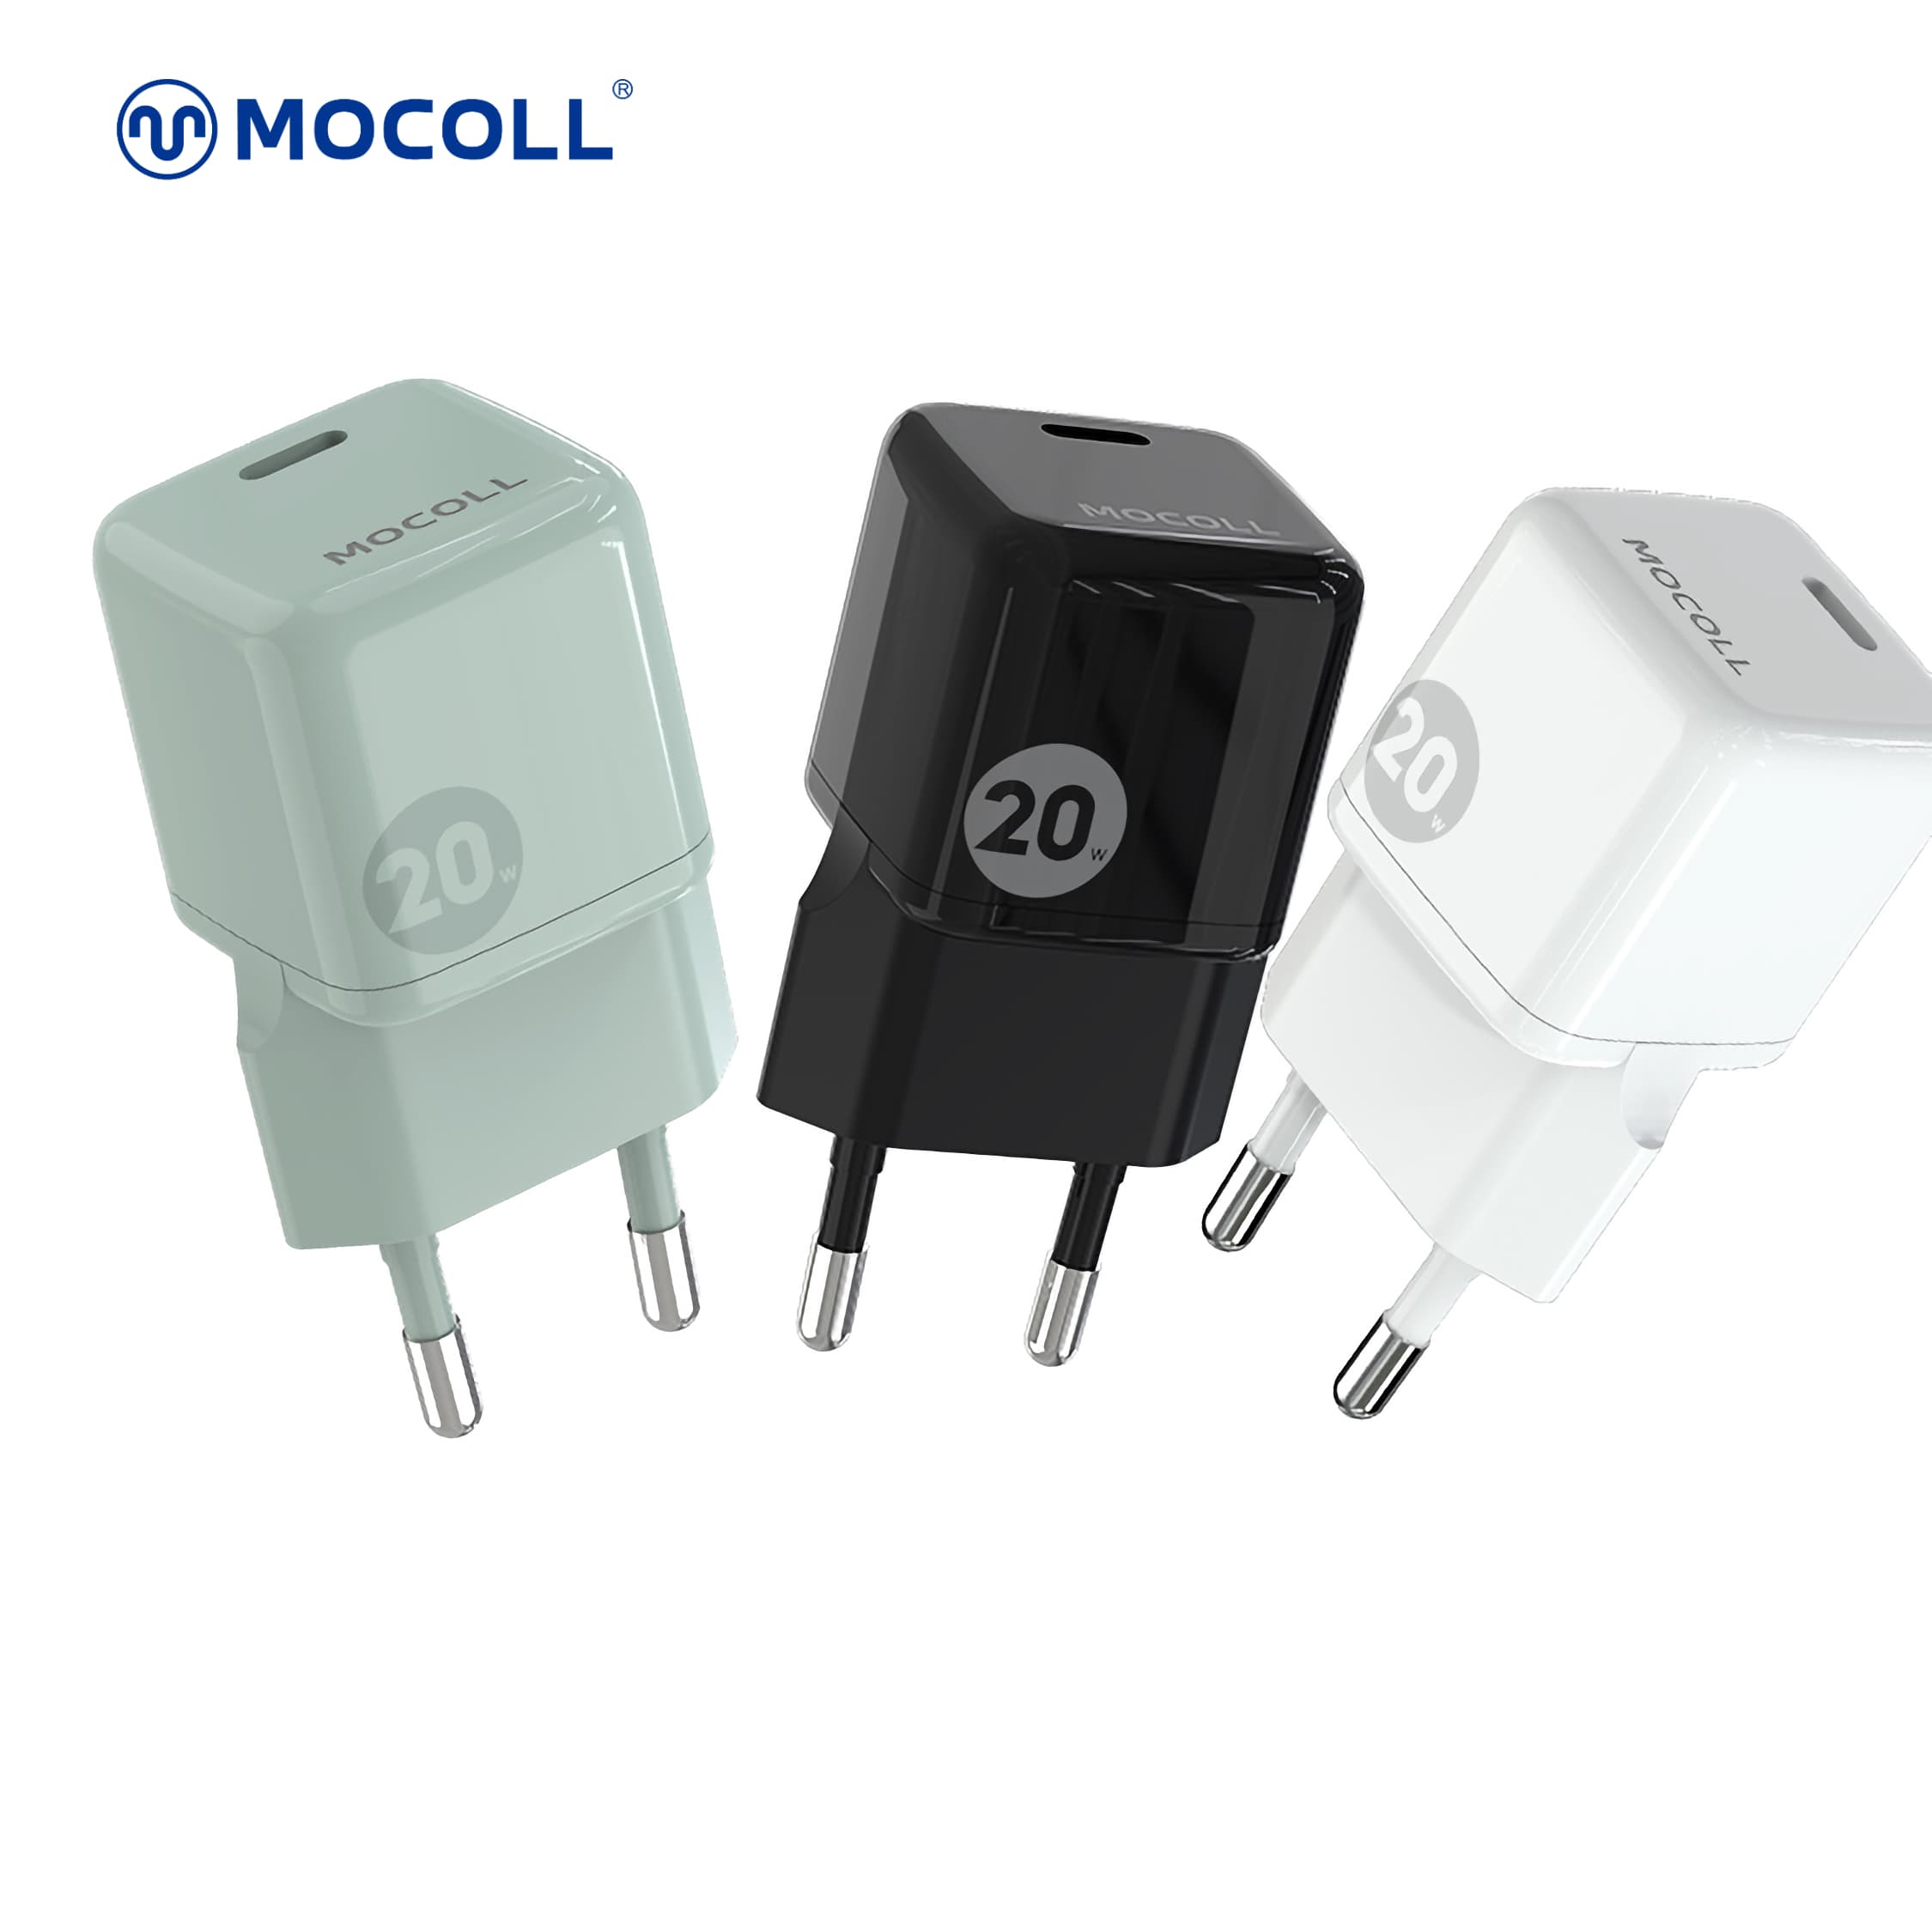 MOCOLL 20W Flash Fast Charger